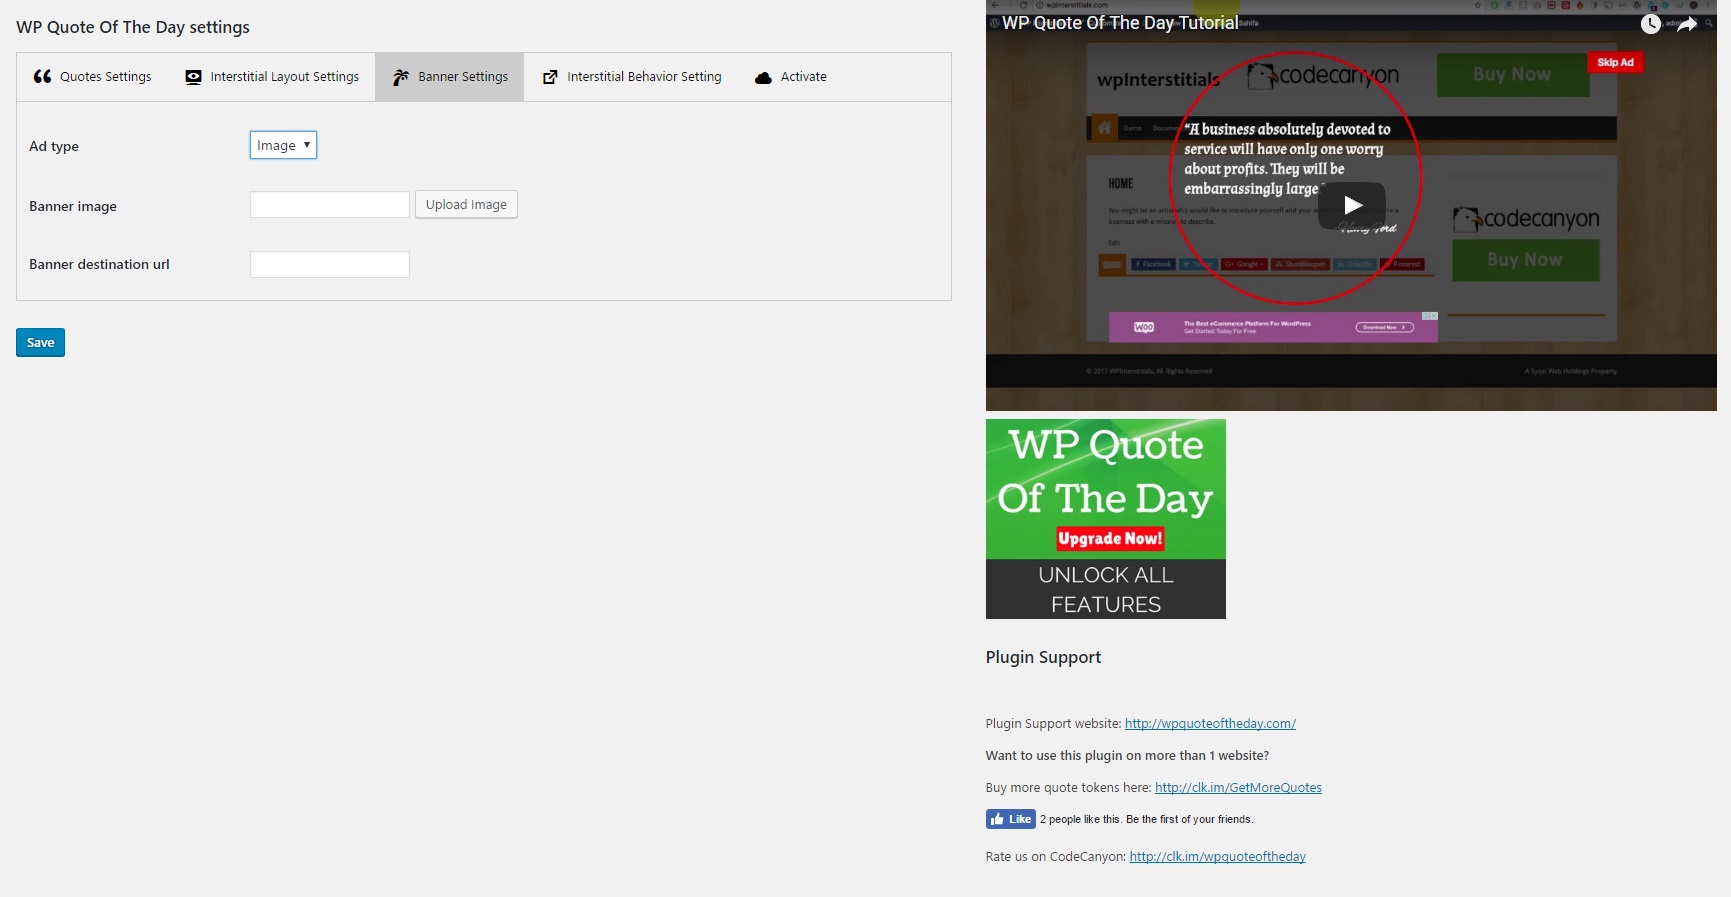 Screenshot of the Banner Setting Tab - Where you would add your AdSense Code or banner and destination URL.